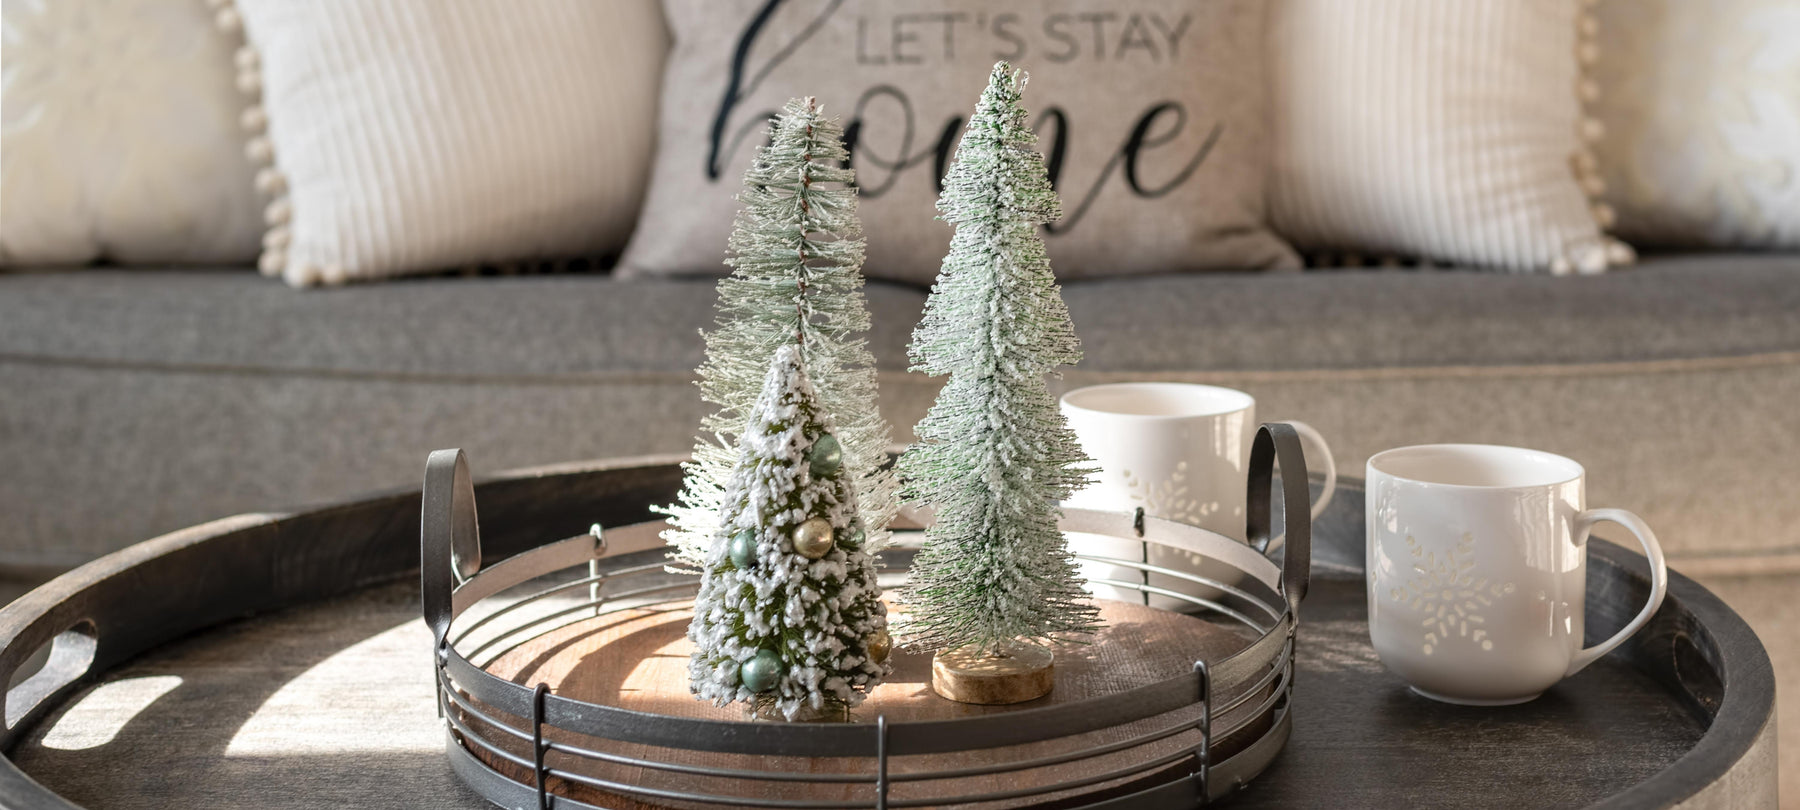 Renovate Your Home for Winter: Decorating Ideas for Winter